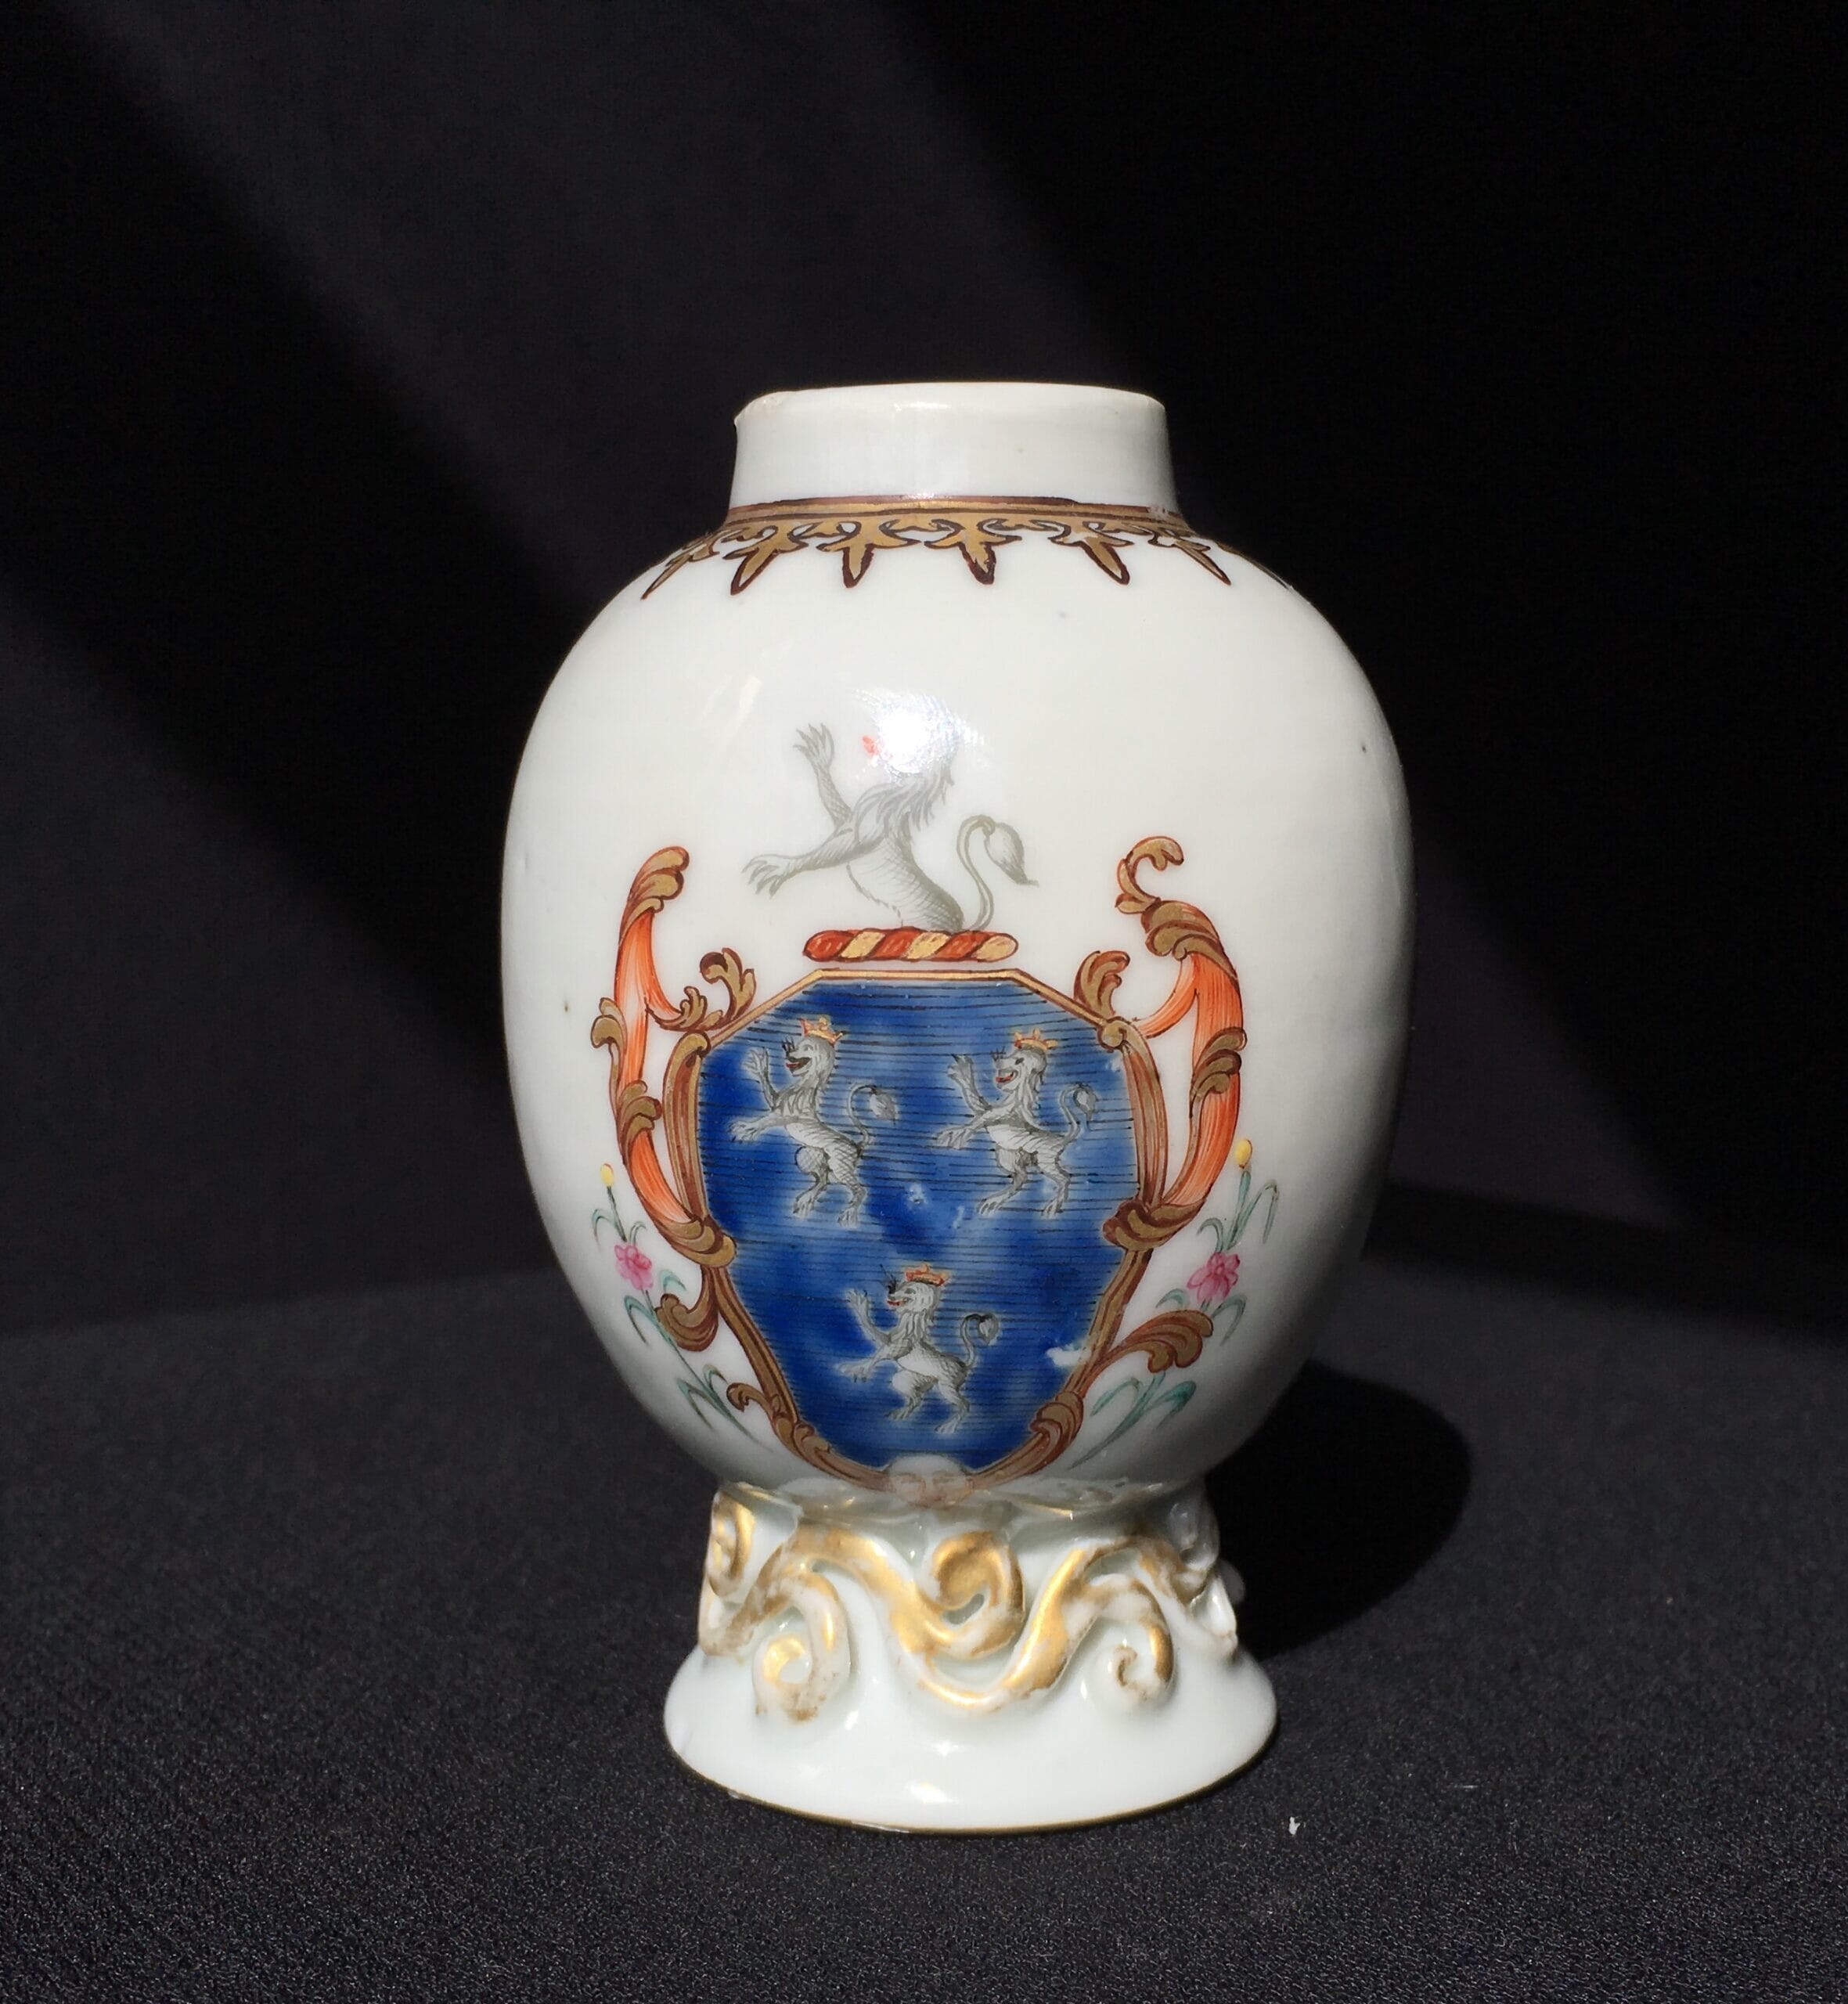 Chinese Export tea canister, armorial with rampart lions, c.1760-0